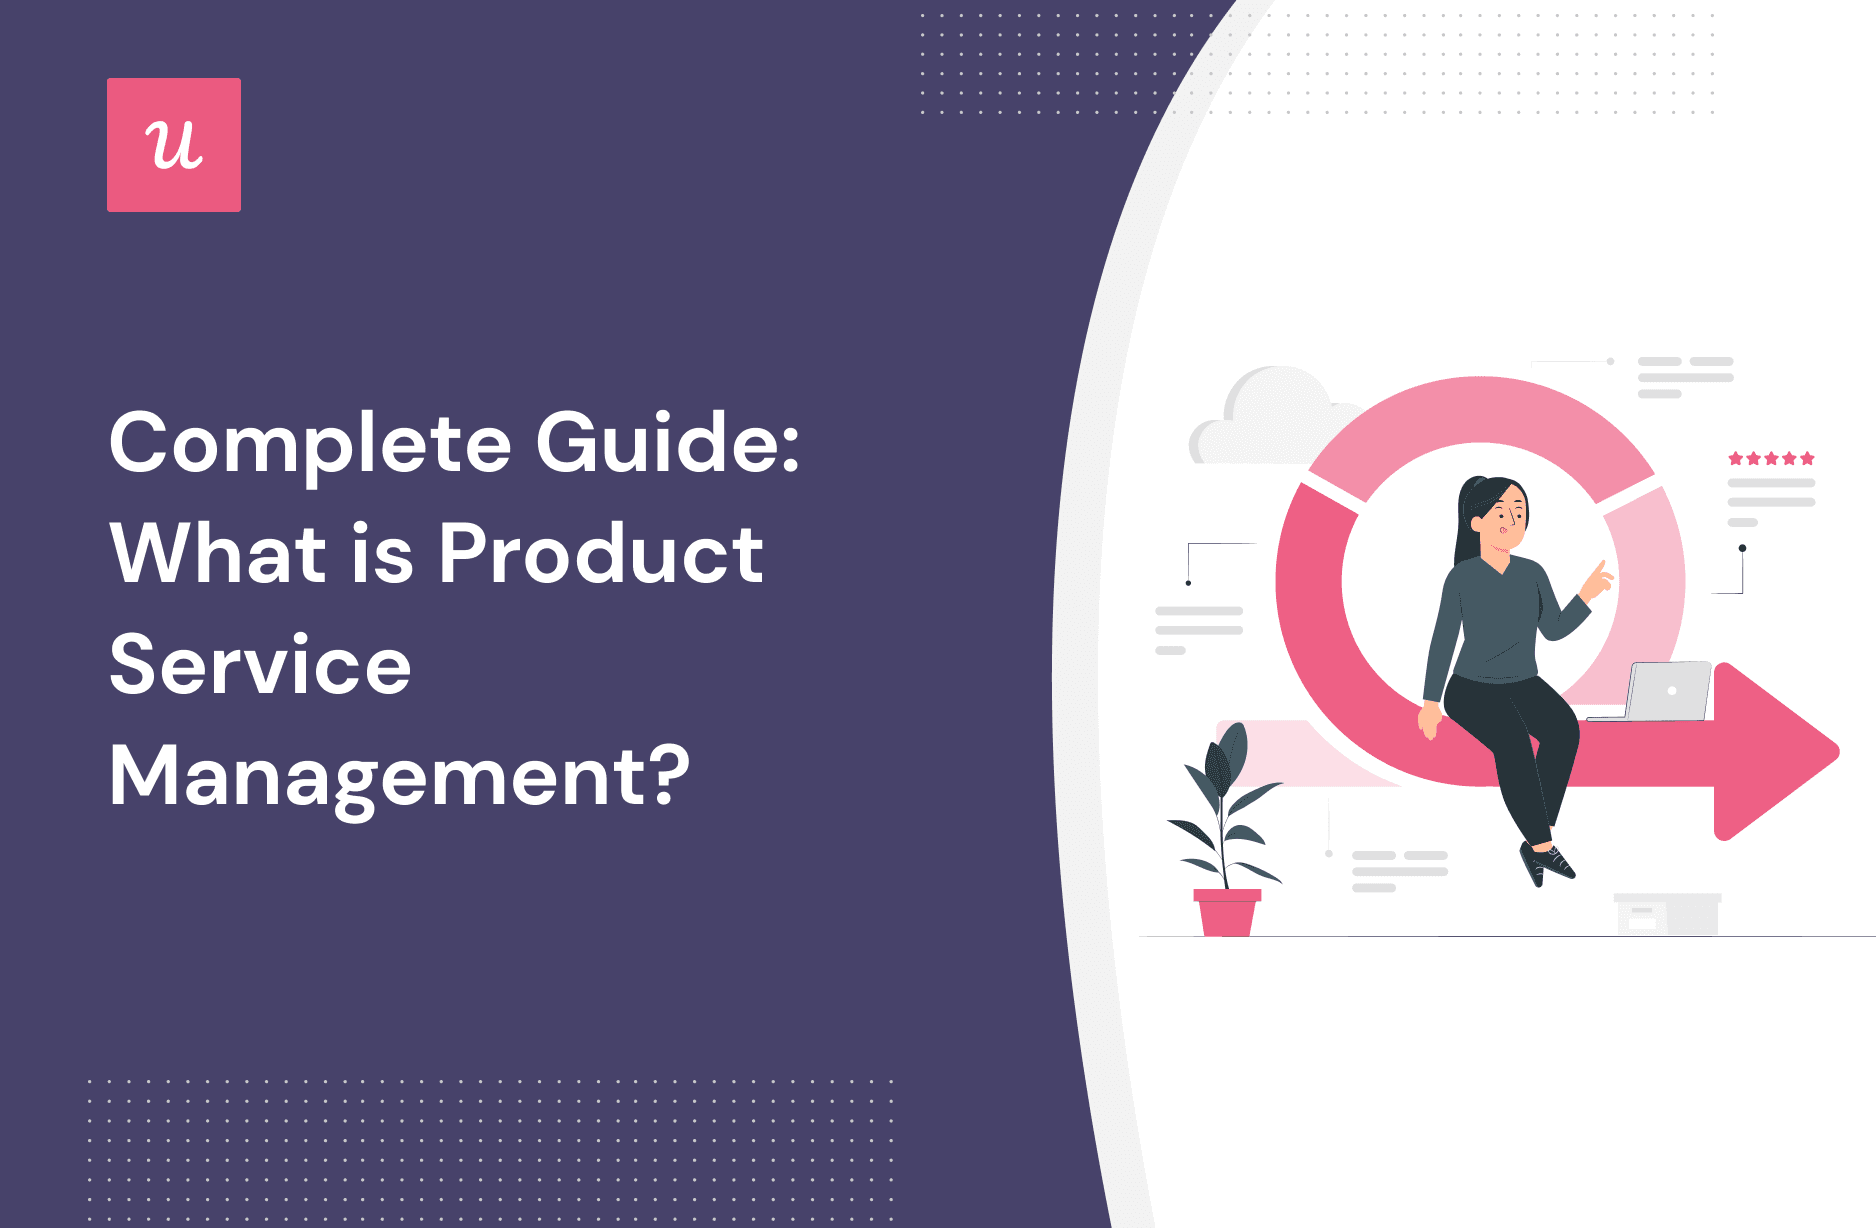 Complete Guide on What is Product Service Management cover